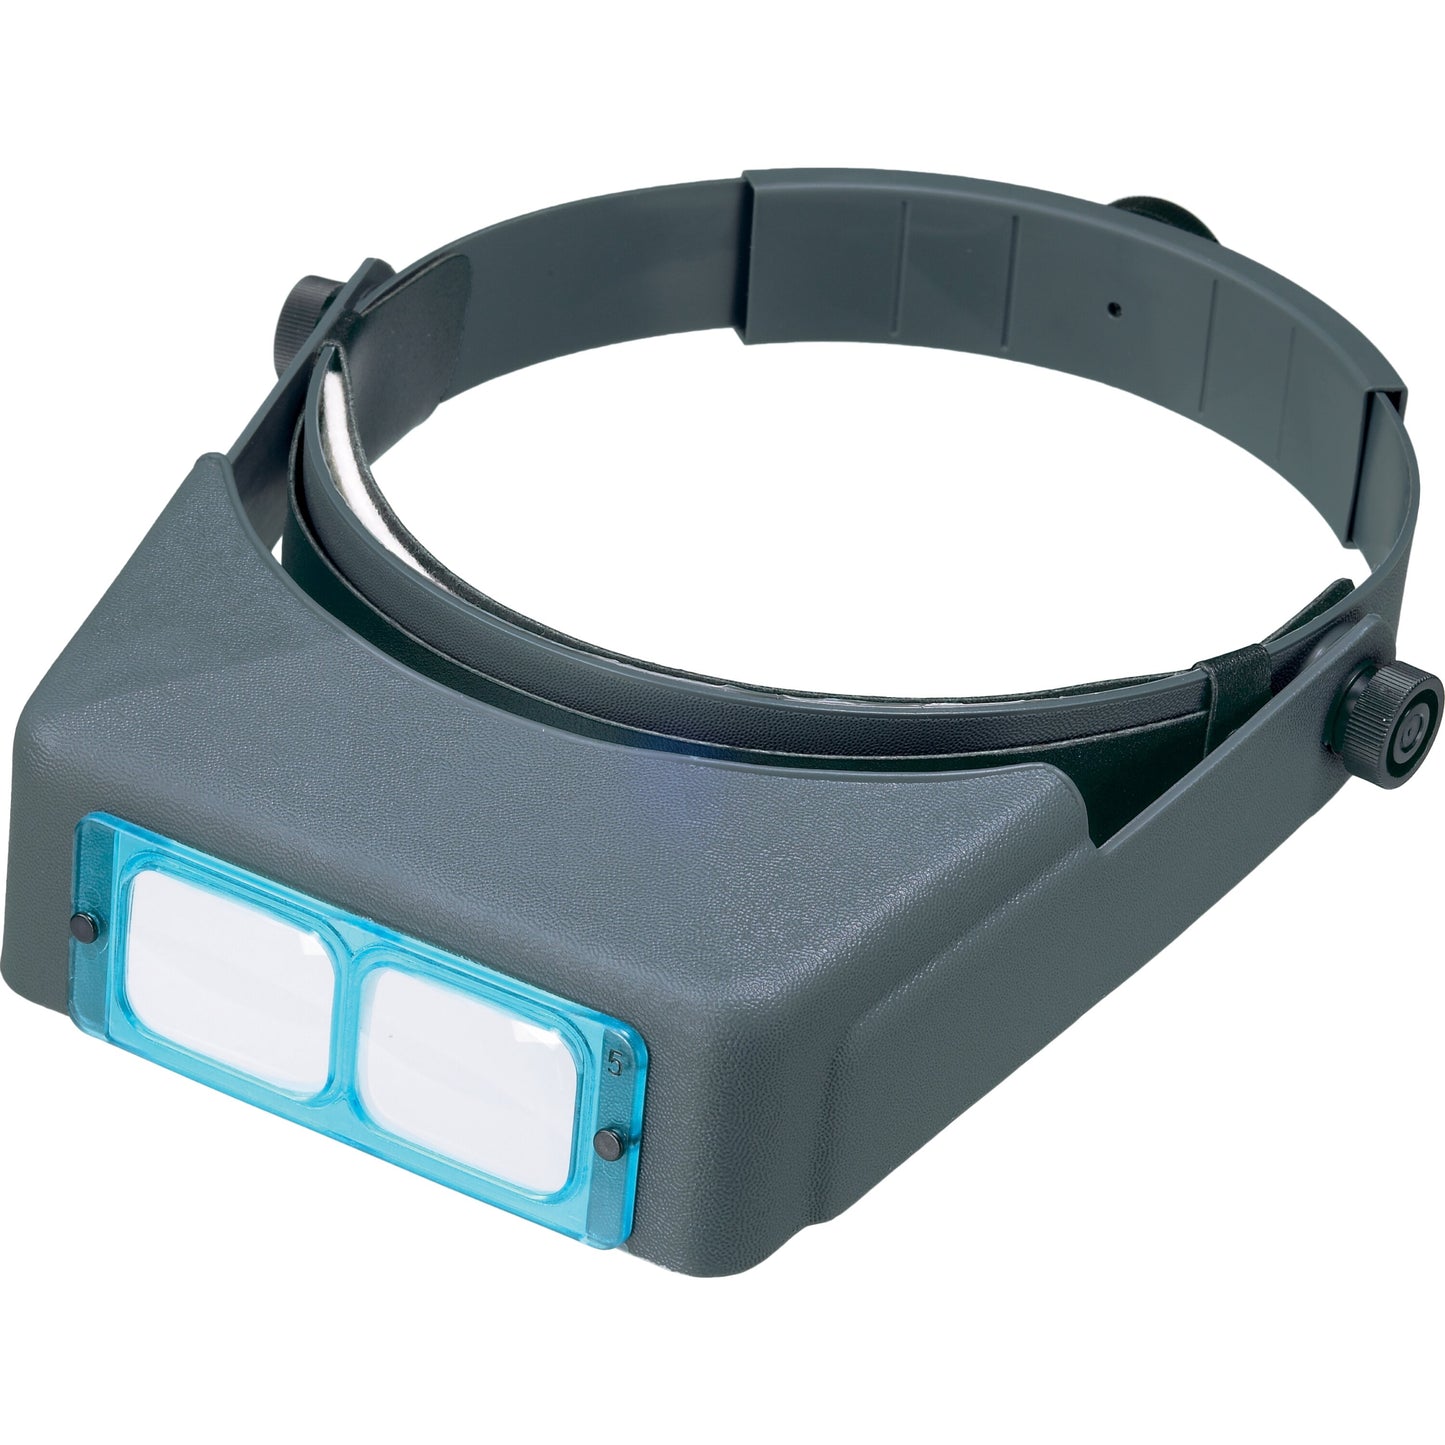 Donegan Optical 1.75X OptiVisor Headset Magnifier for Jewelers Watchmaker